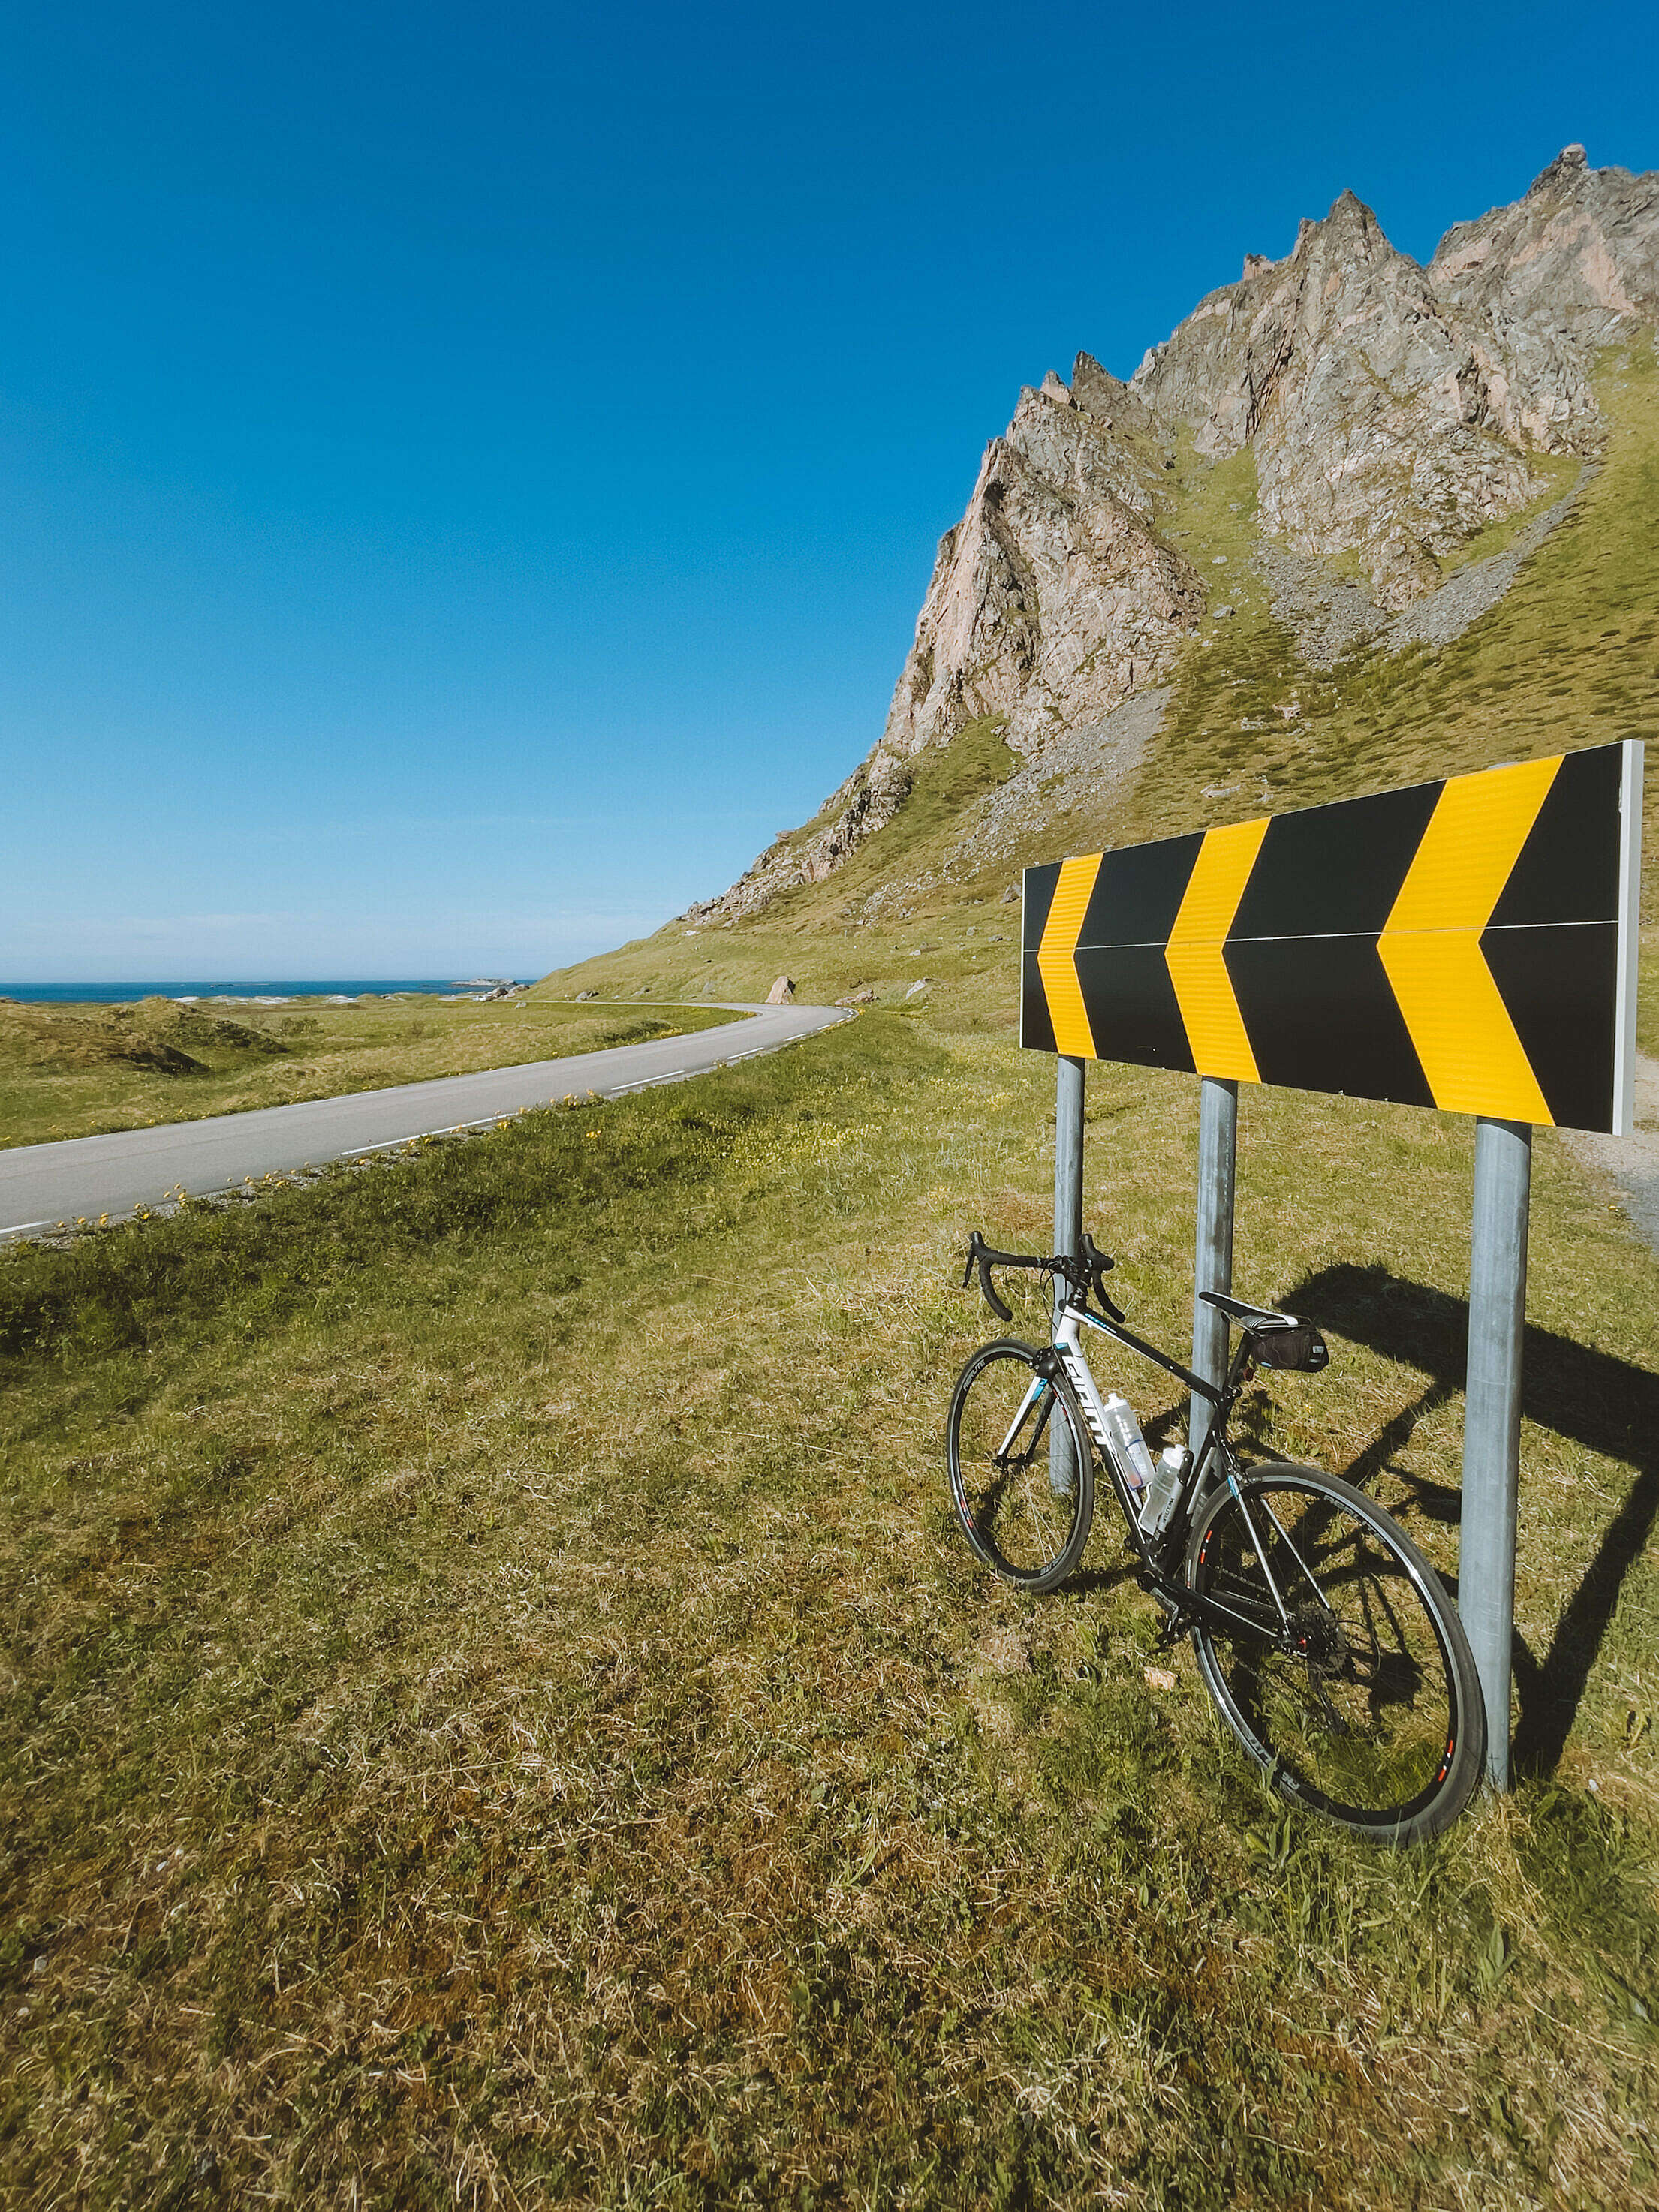 Road Bike and a Road Sign on a Coastal Road Free Stock Photo